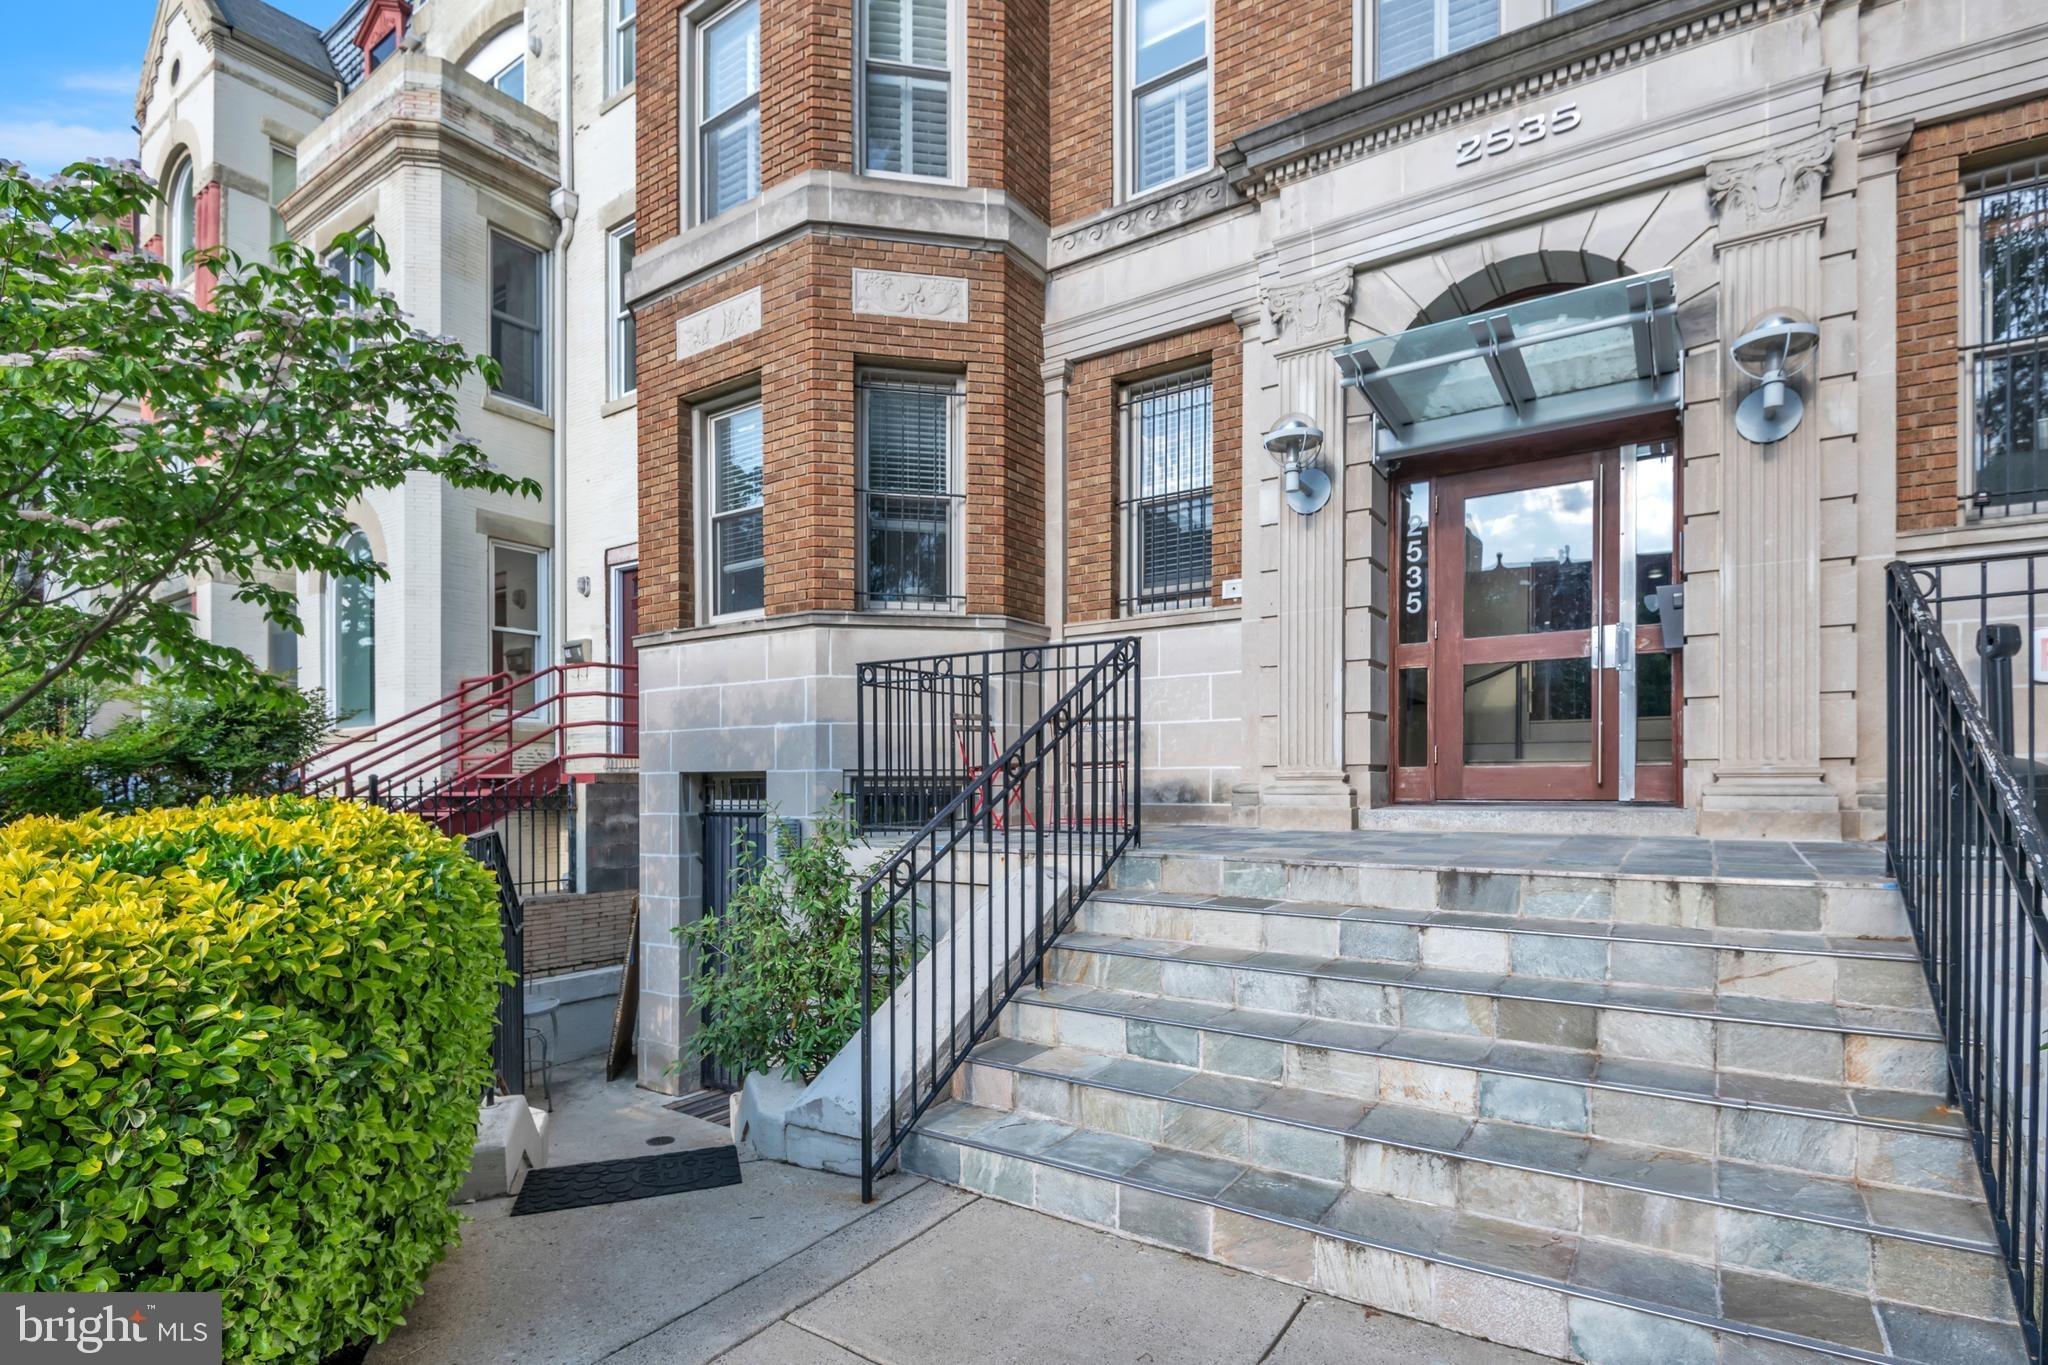 28. 2535 13th Street NW